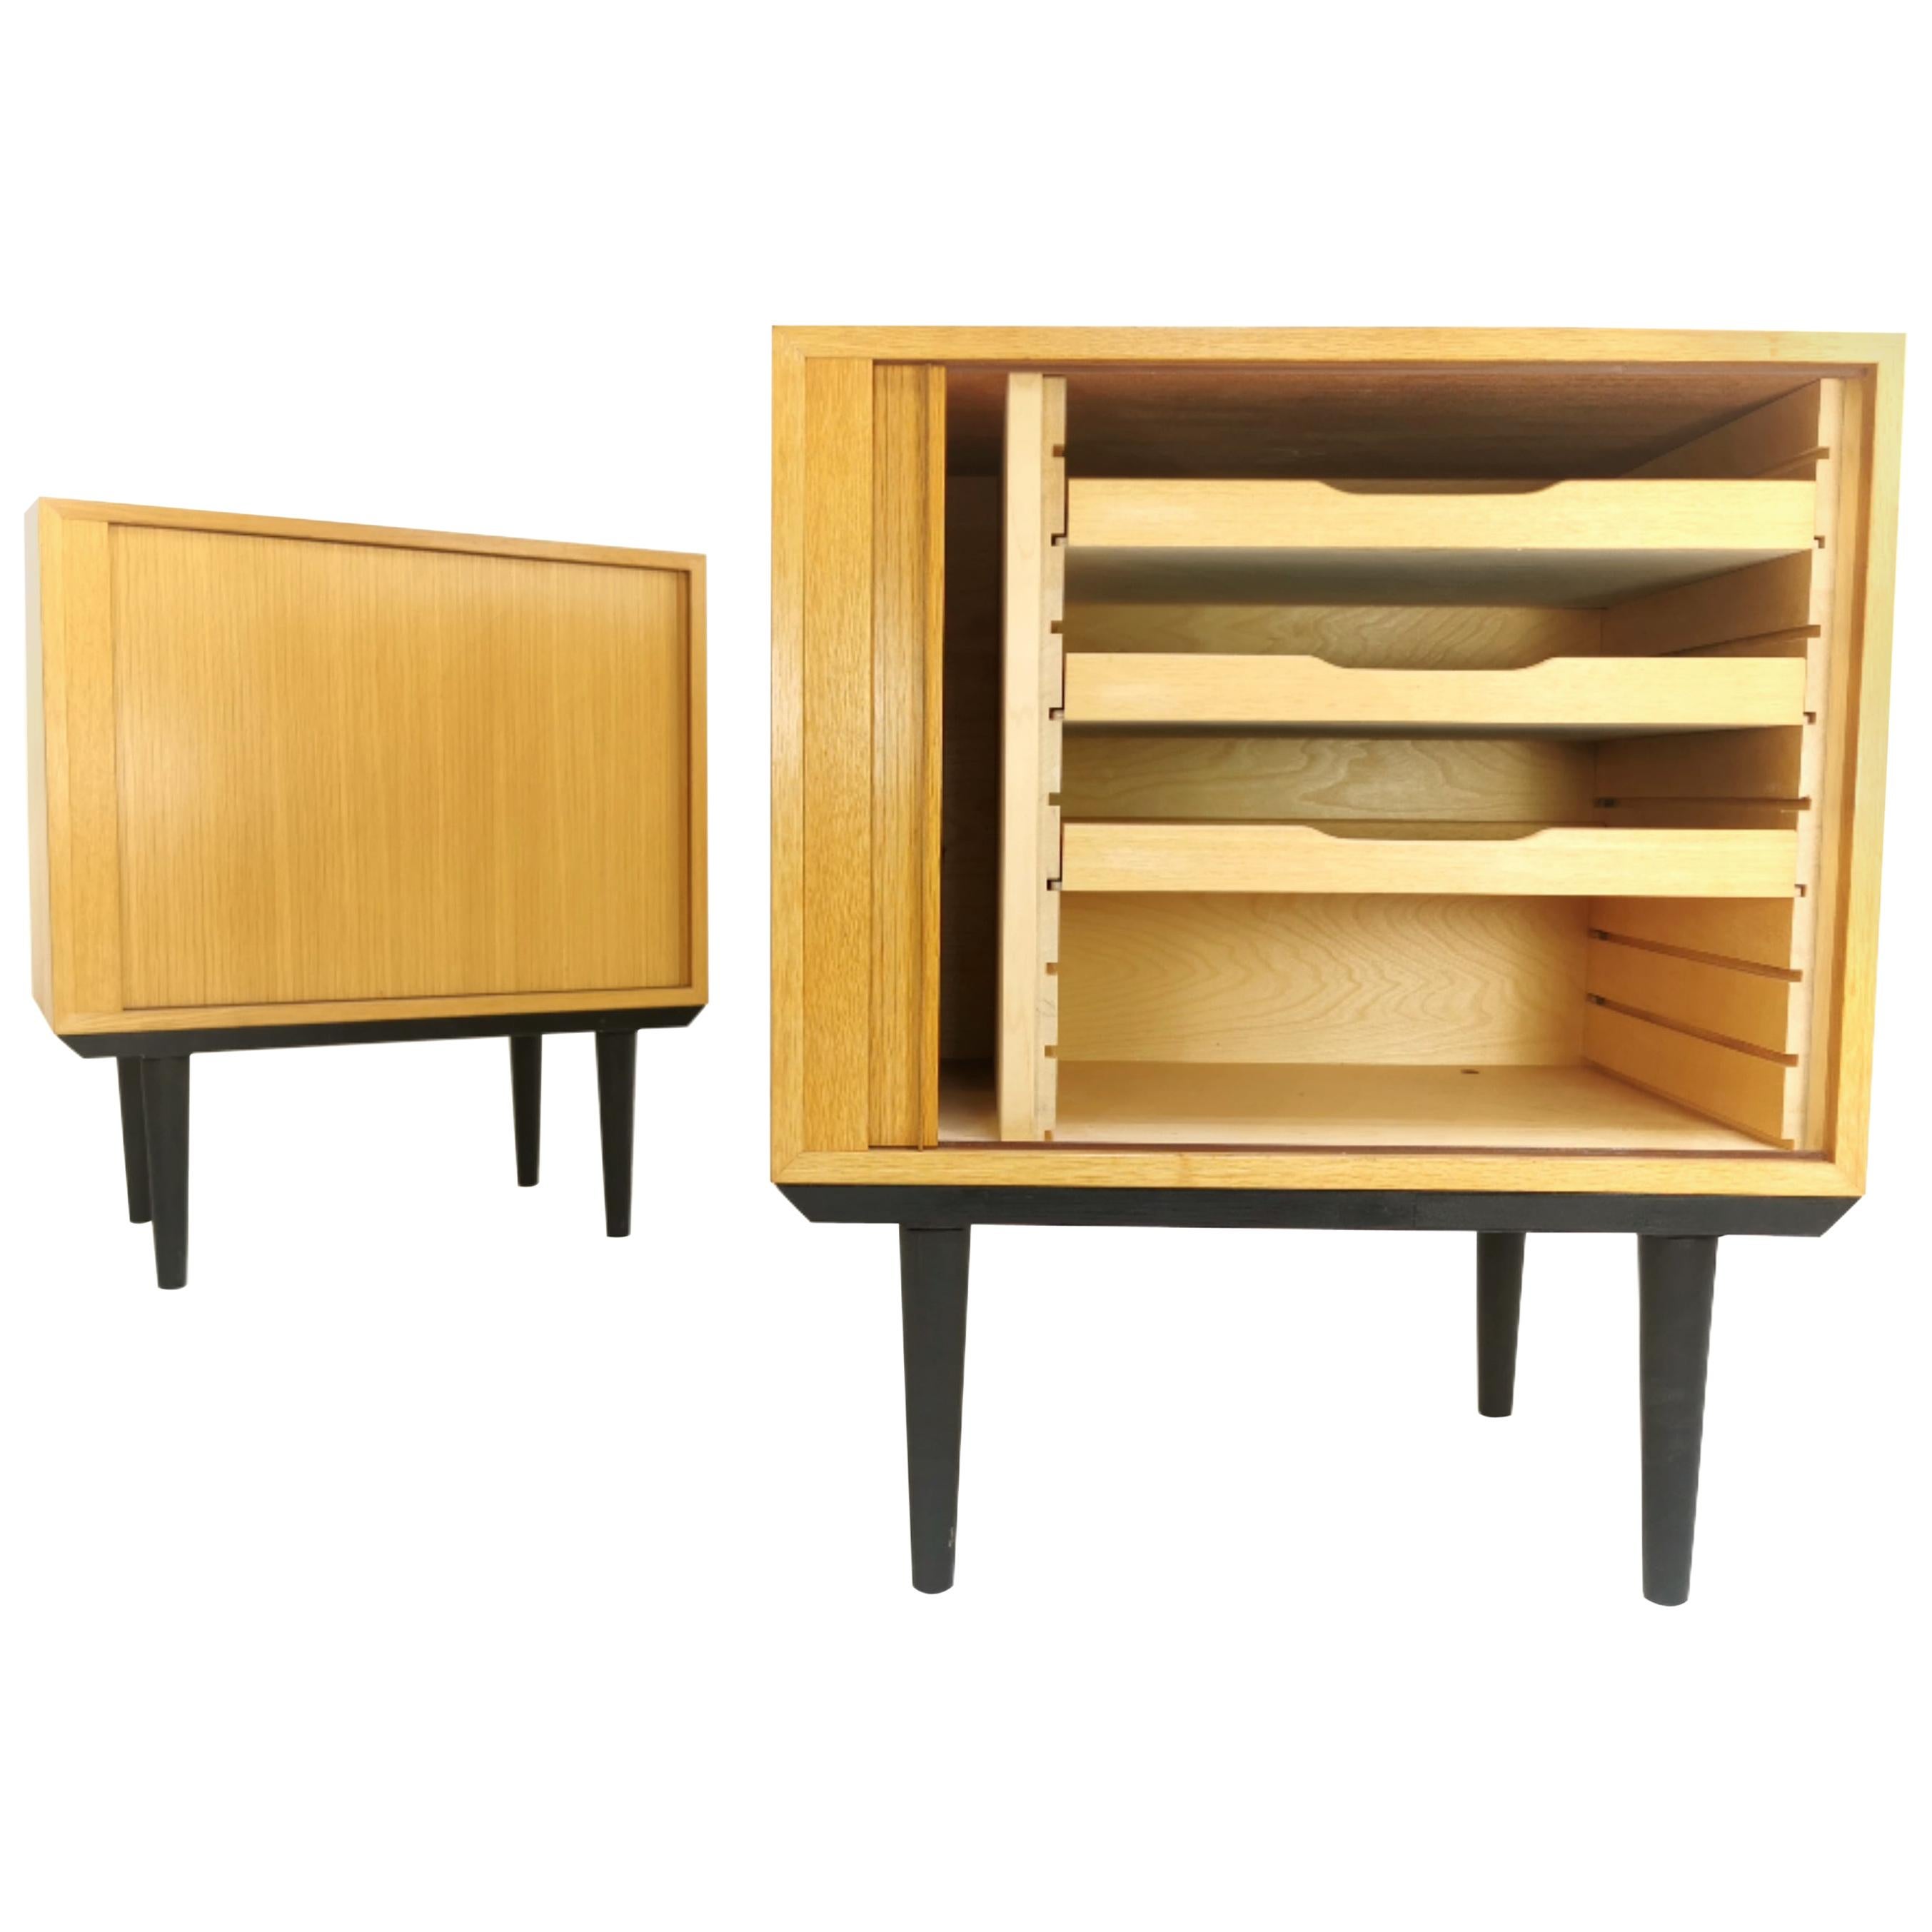 Pair of Danish Midcentury Tambour Cabinets by Hundevad, 1970s